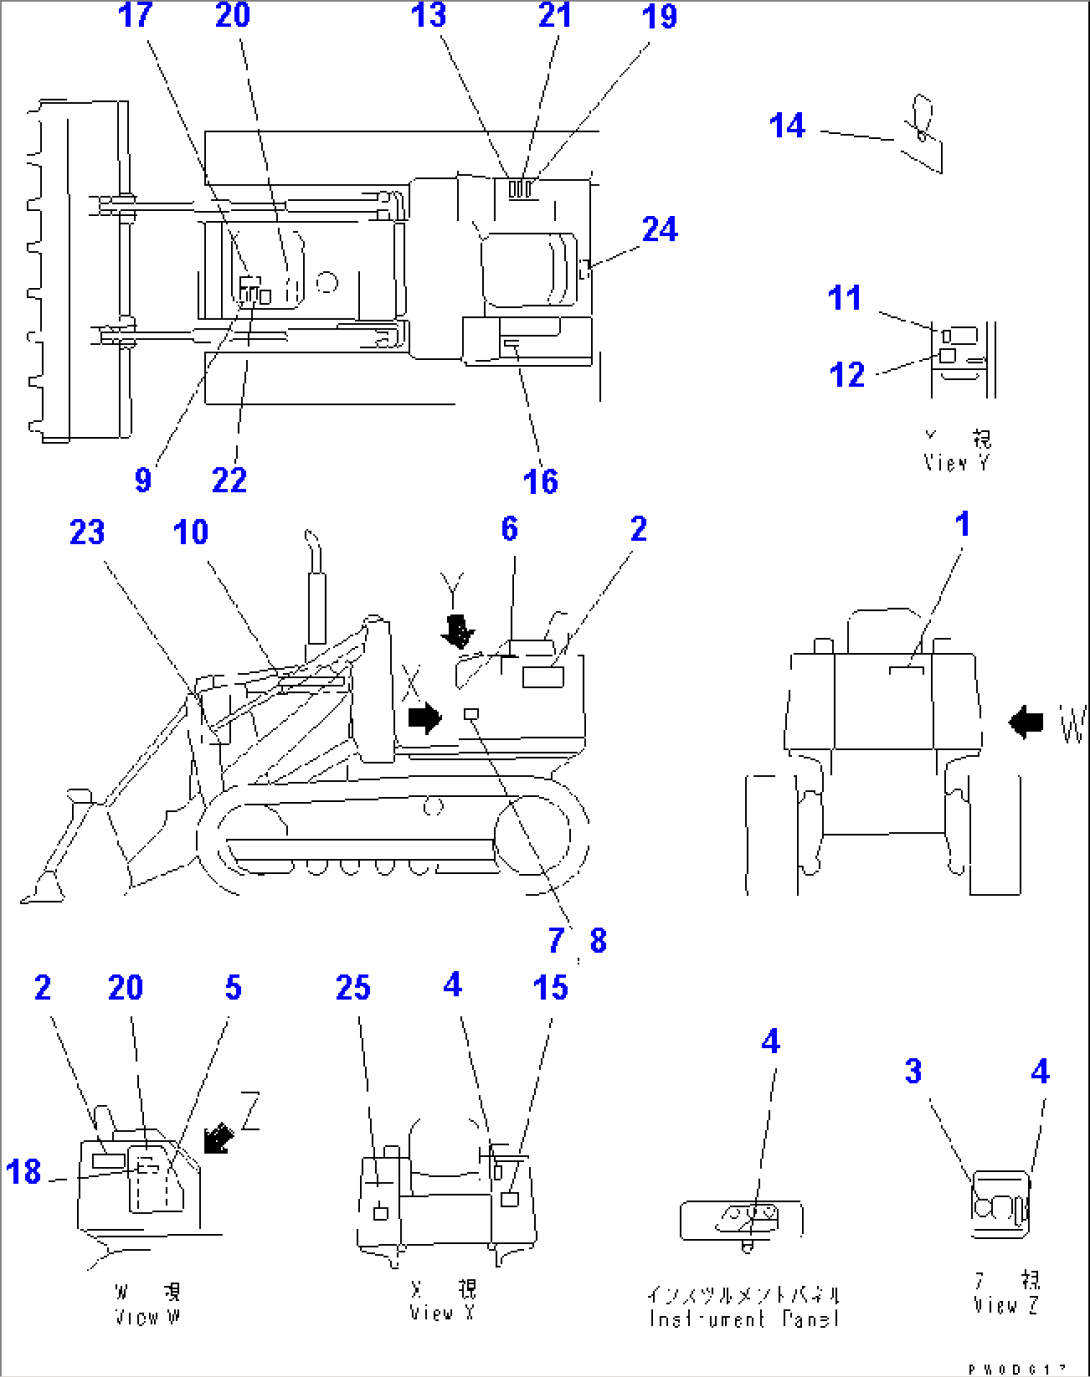 MARKS AND PLATES (JAPANESE)(#61181-61200)